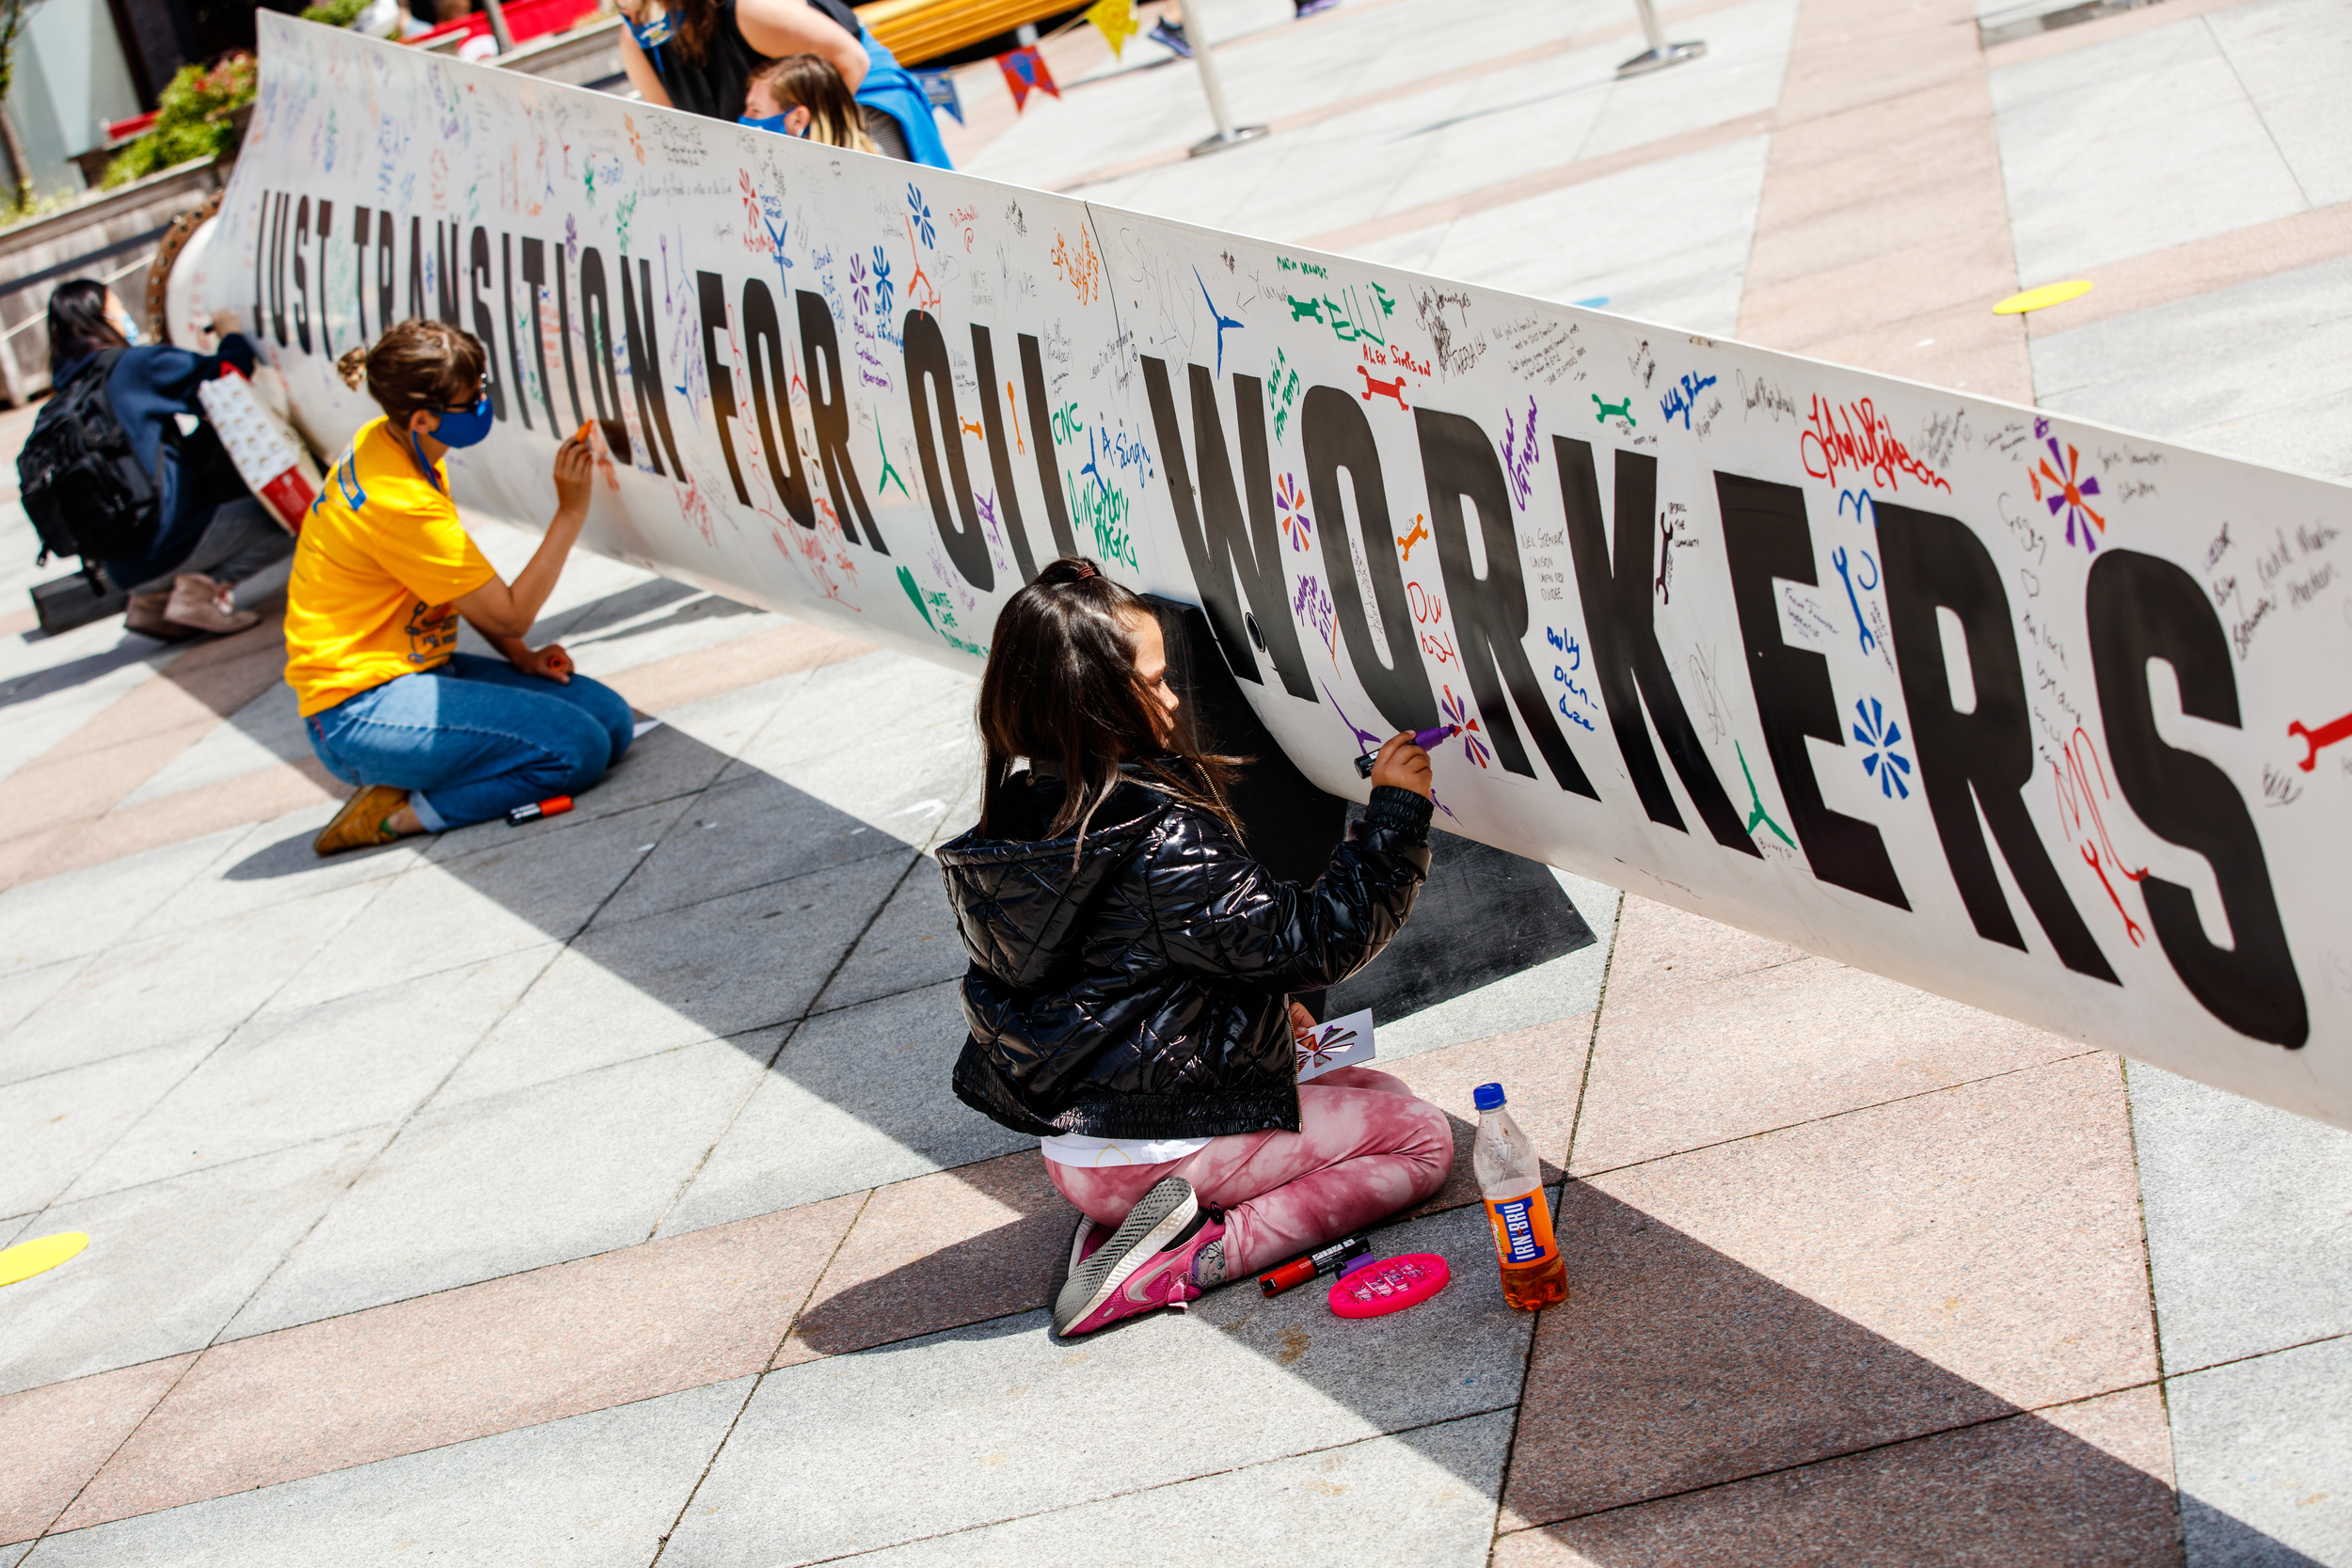 In a sunny city square, three people write messages on a large white wind turbin blade with coloured pens. Large block capitals on the blade read 'Just transition for oil workers'.